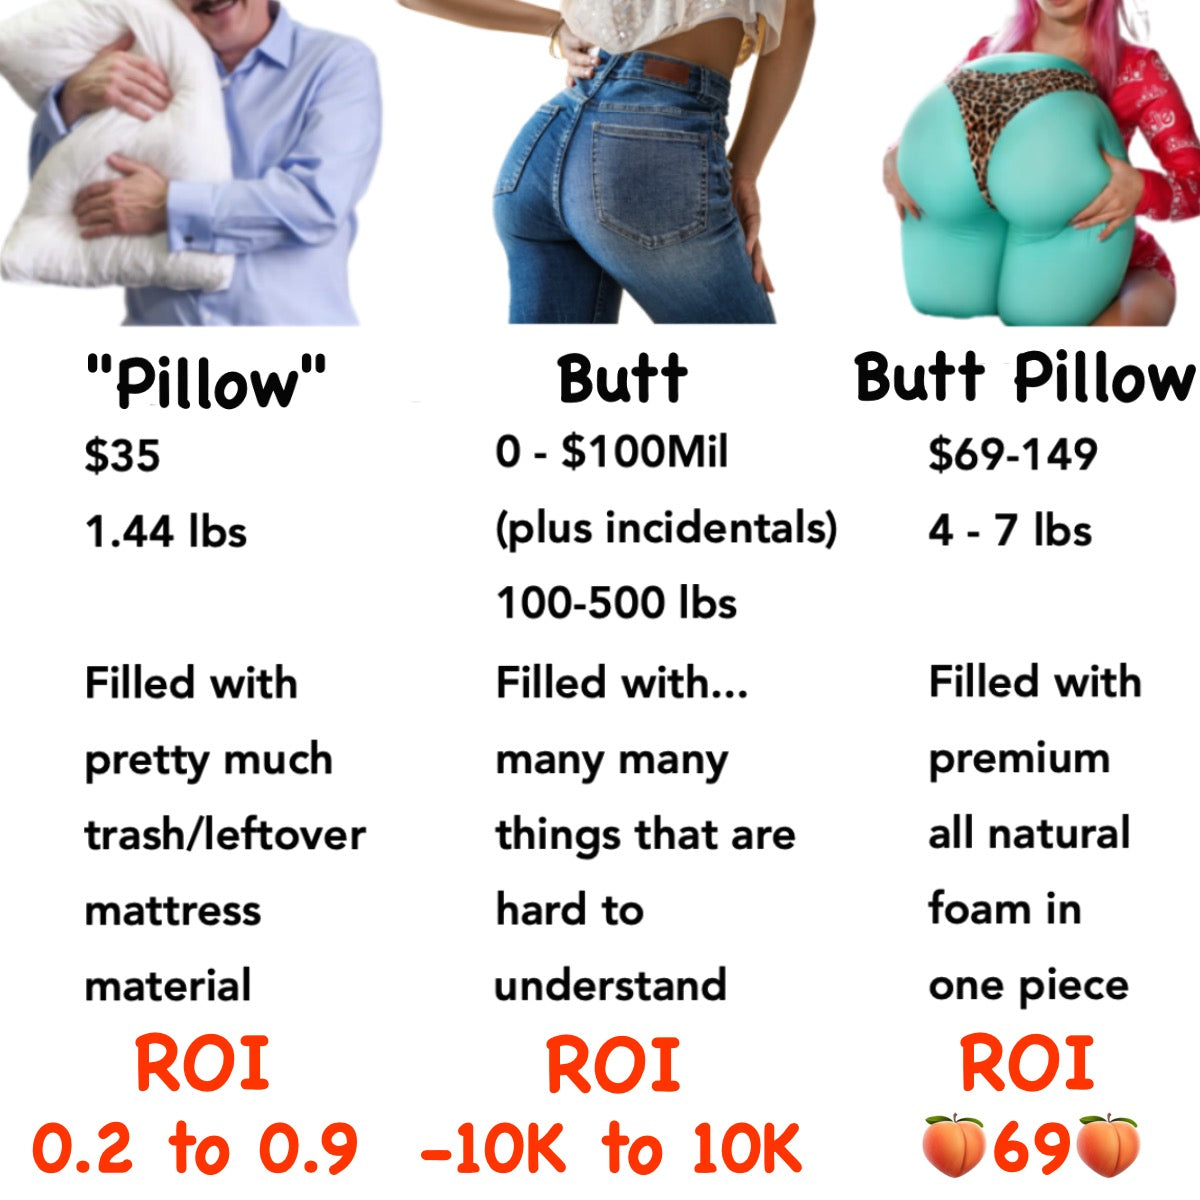 Butts have the highest ROI ever